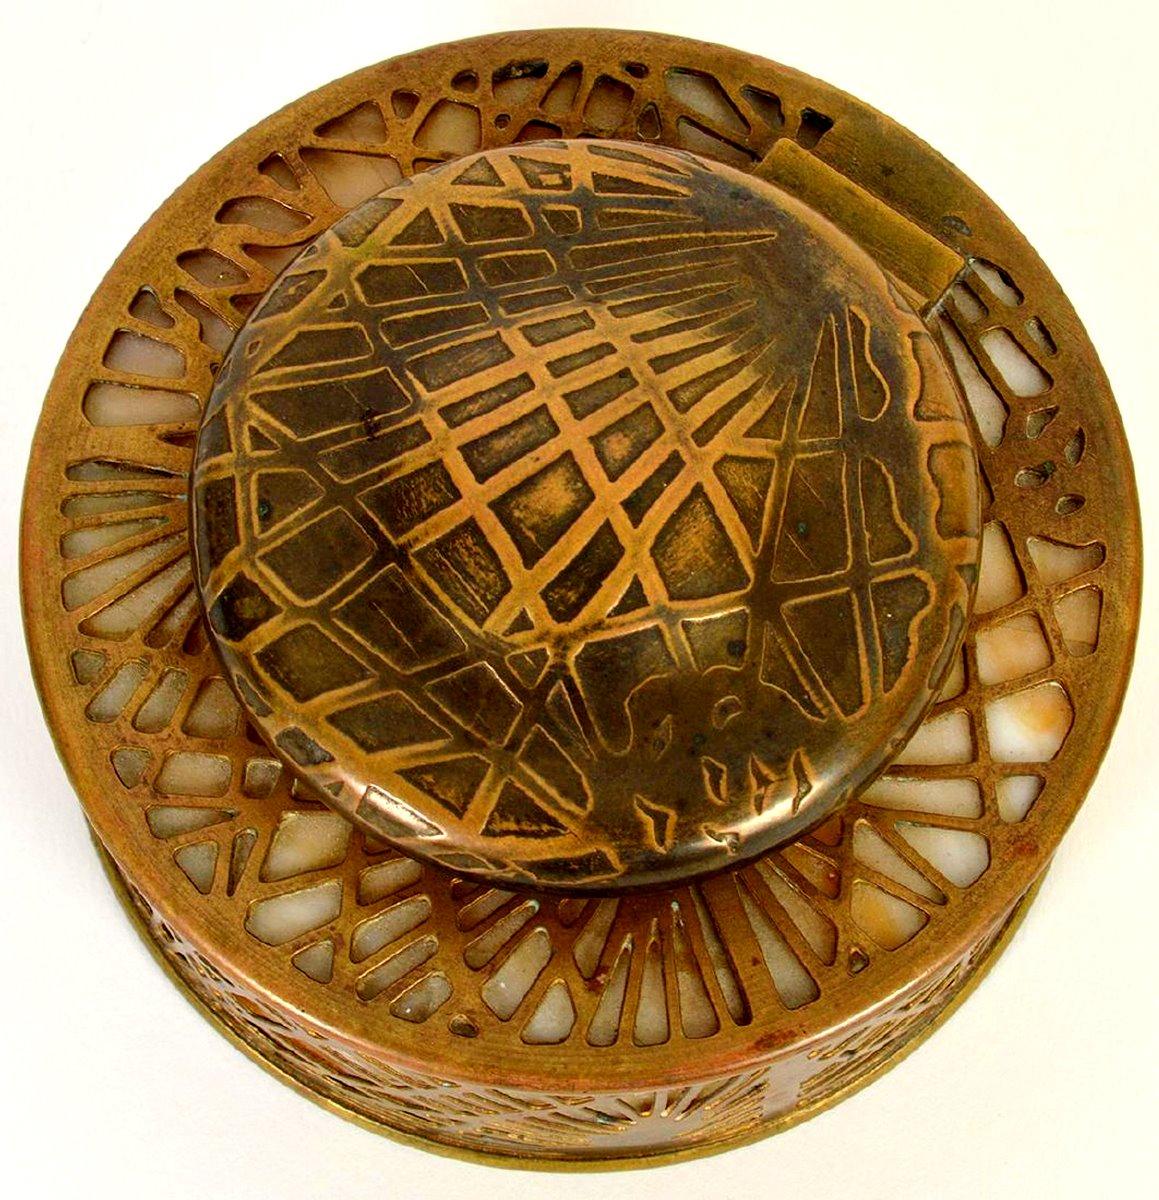 Bronze pine needles laid over amber slag glass make this inkwell in Tiffany Studios' most popular pattern exquisite.

A few important notes about all items available through this 1stdibs dealer:

1. We list all our items as being in 